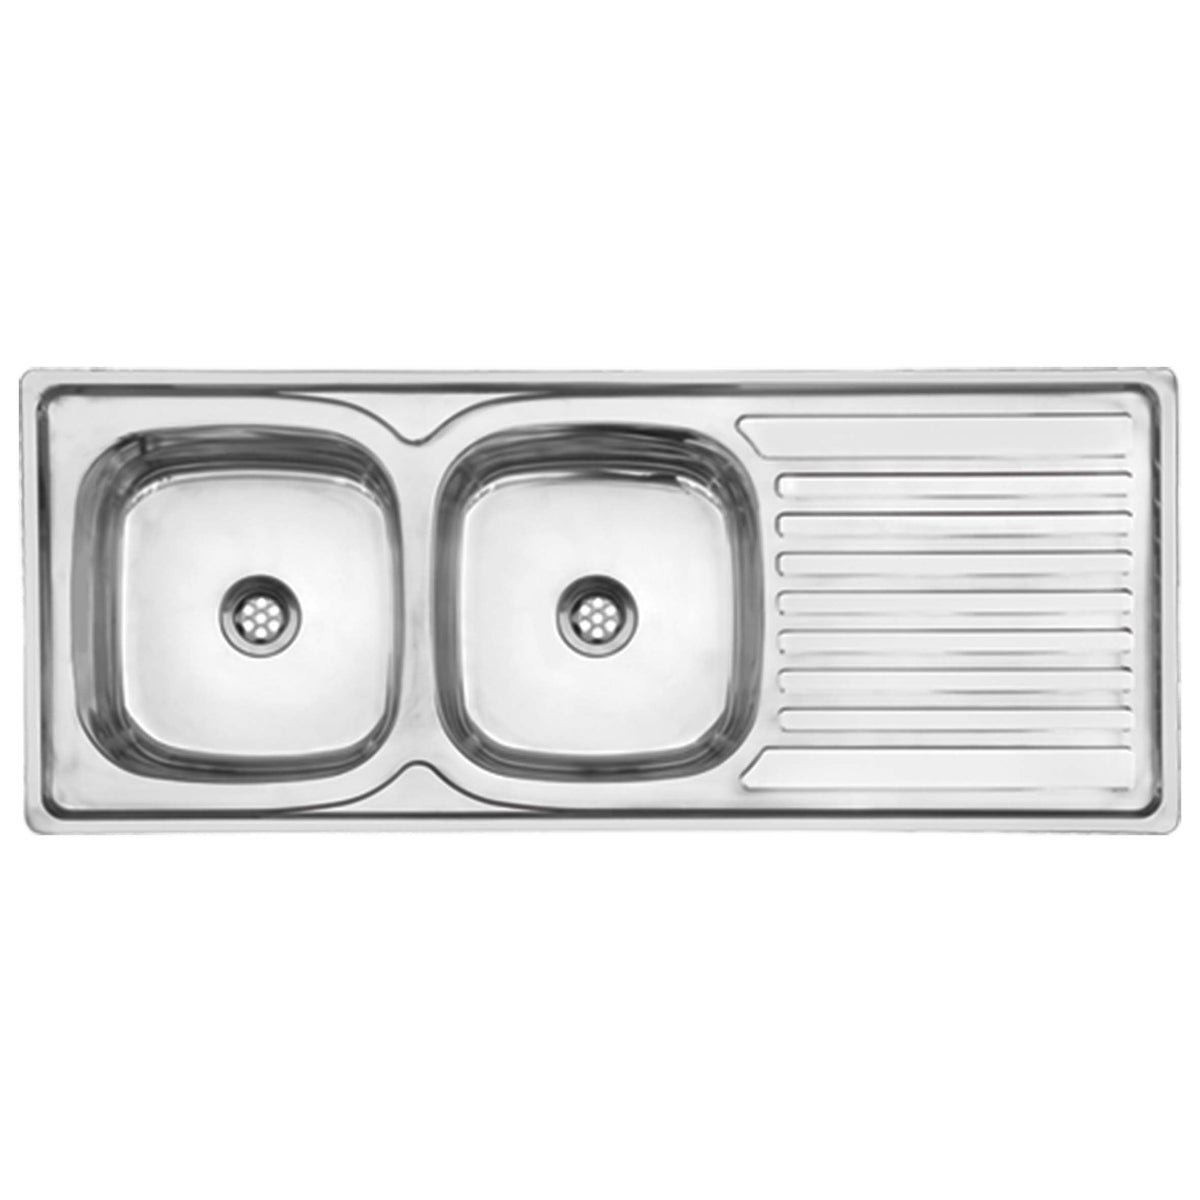 Double Bowl Sink Incl Waste 1200mm